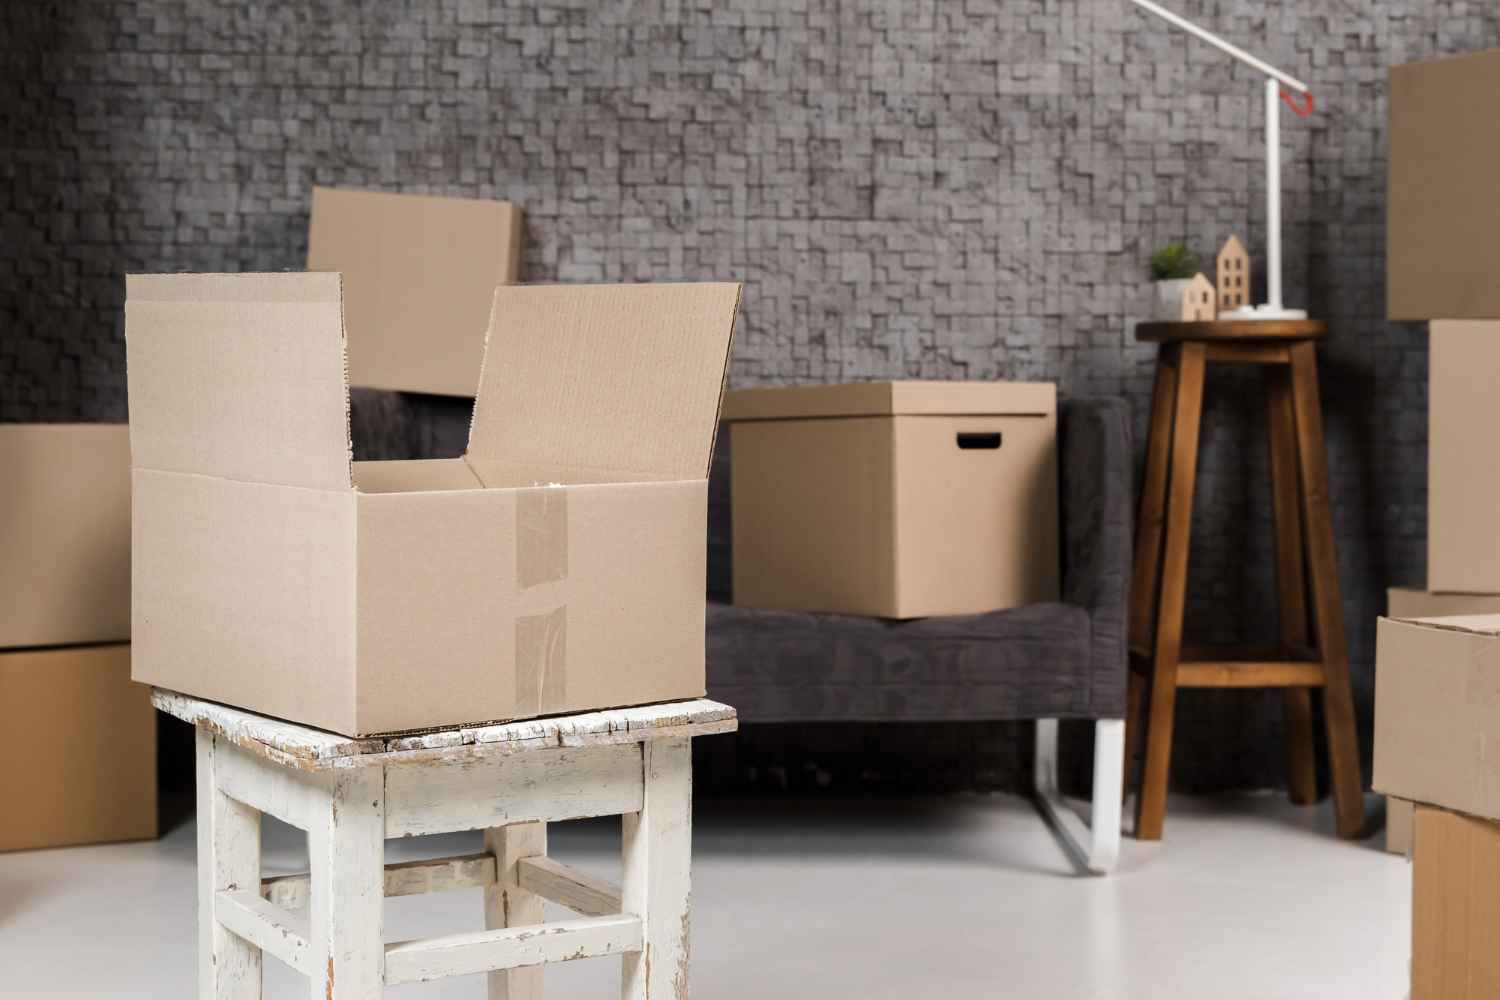 Furniture Removal in Leeds